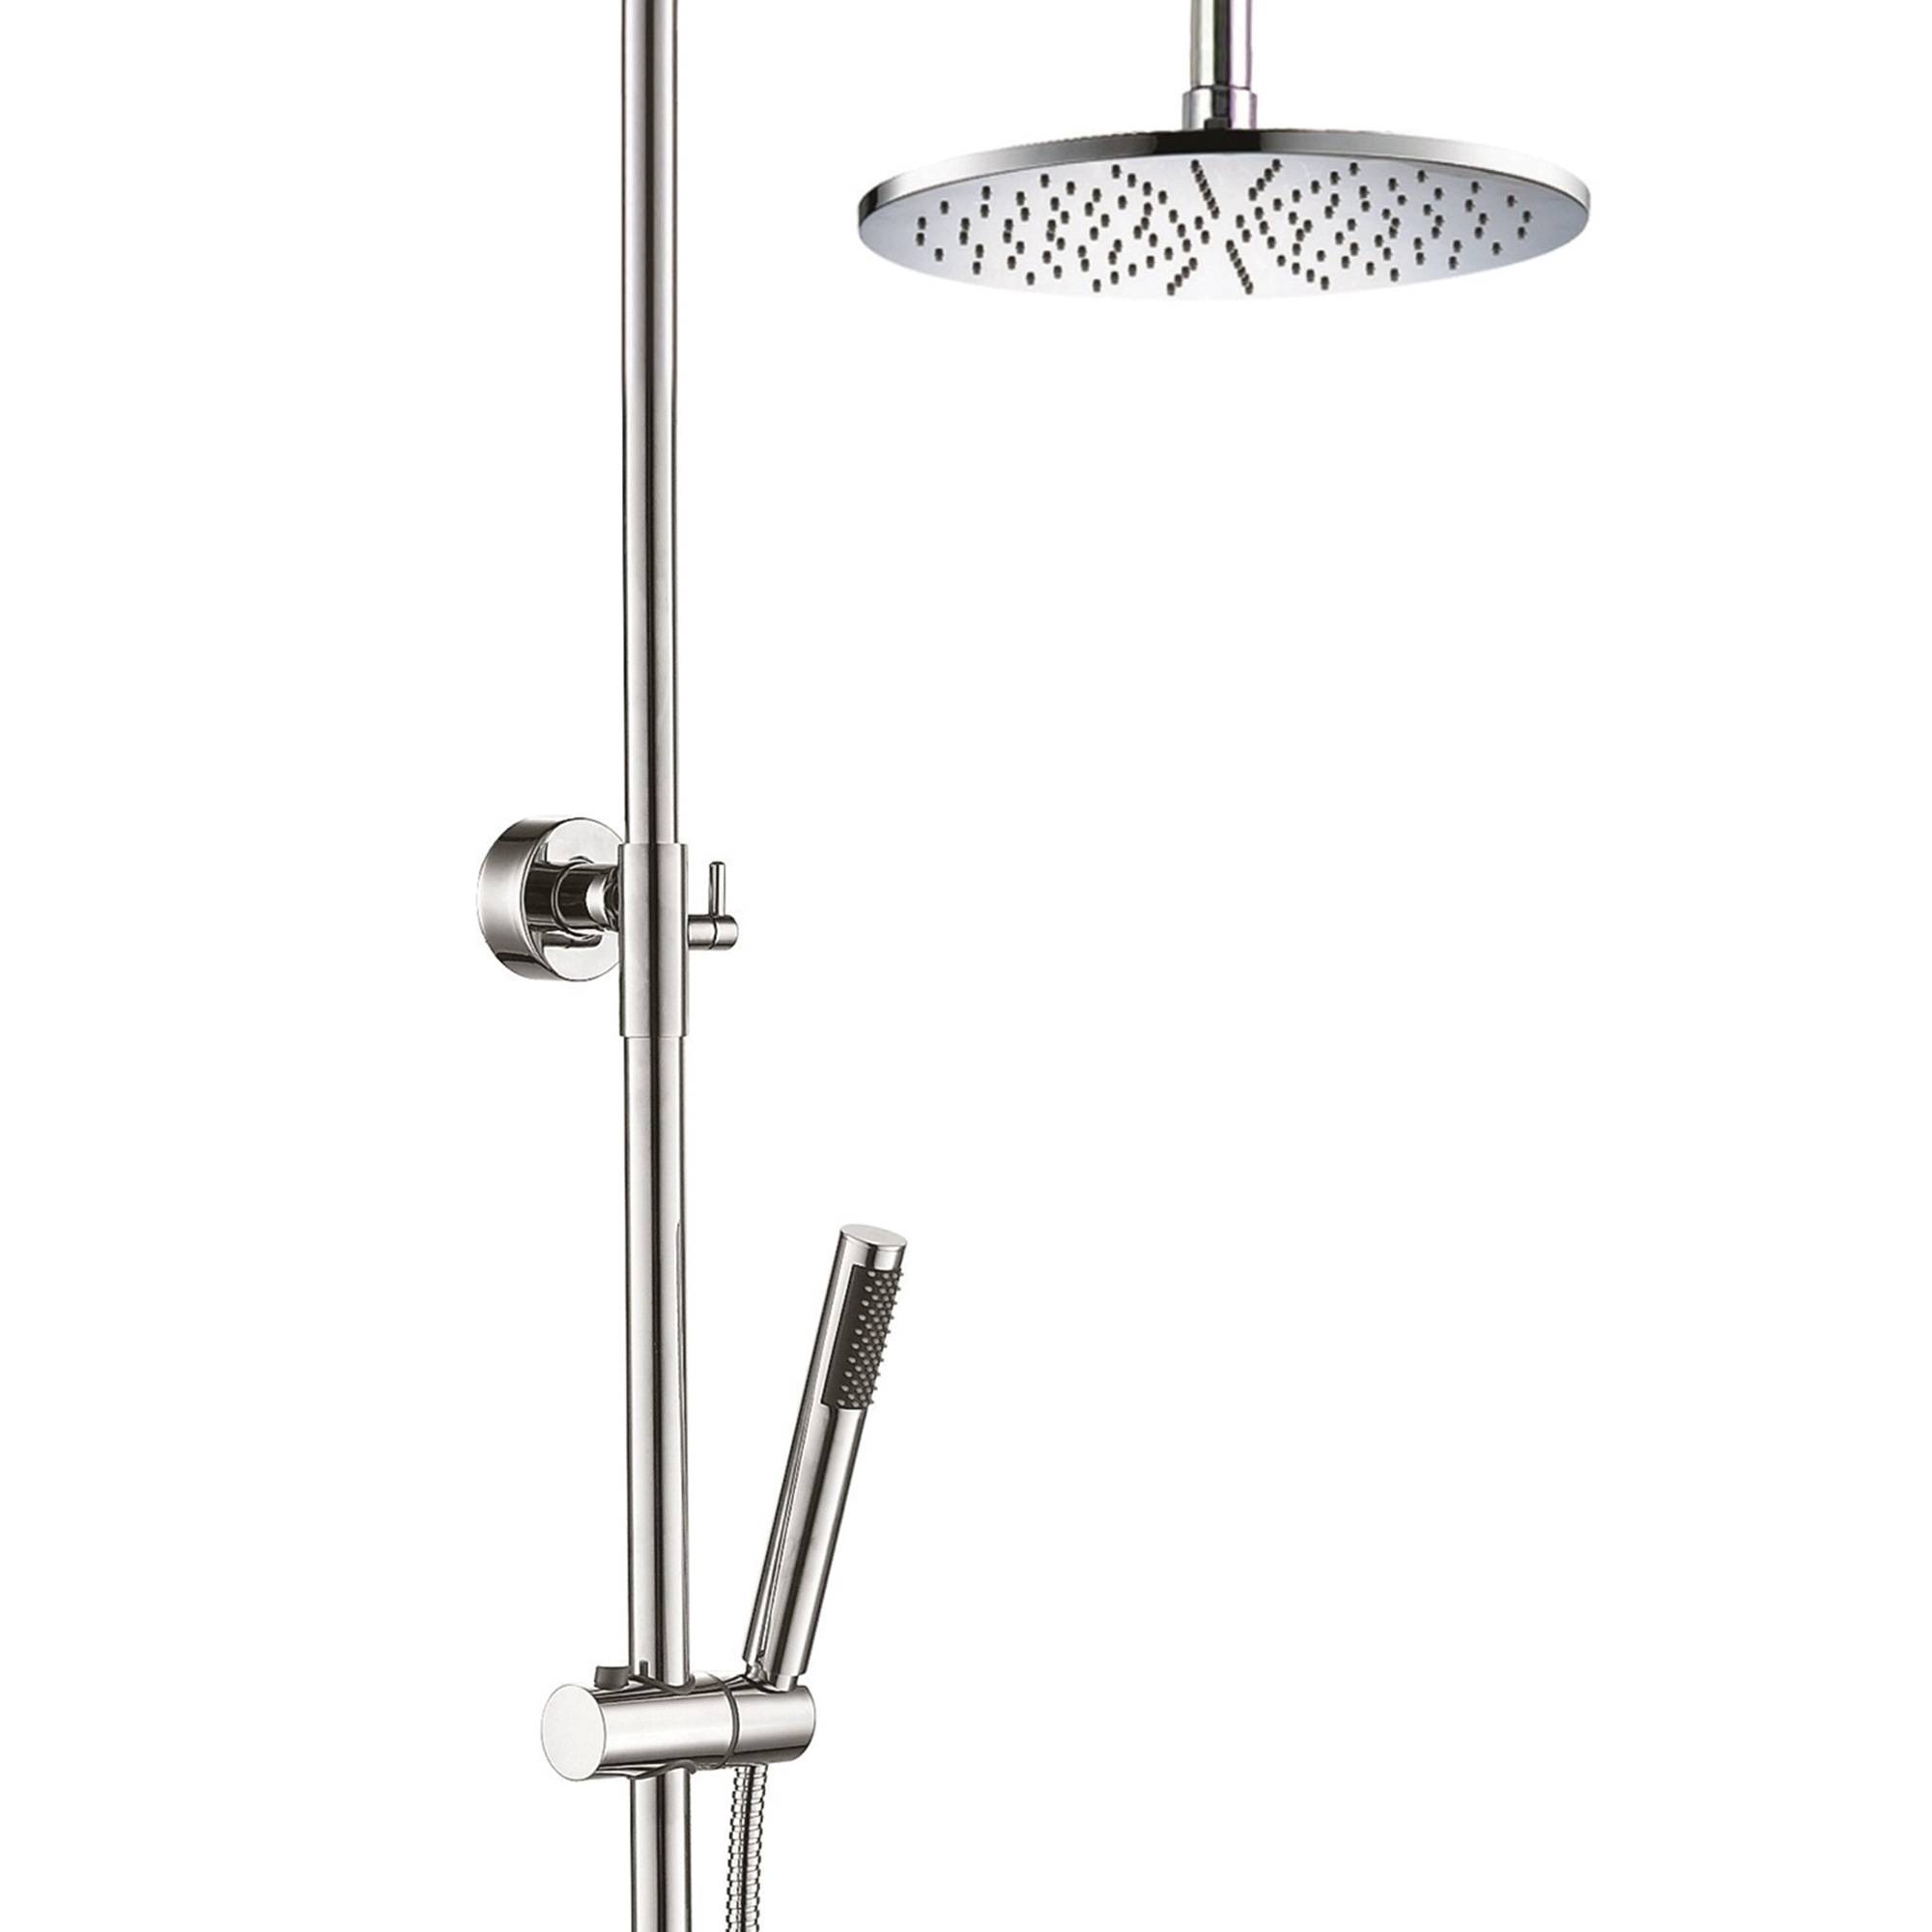 Breuer Aquamaxx 310 Shower Column with single lever mixer also for low ceiling height 